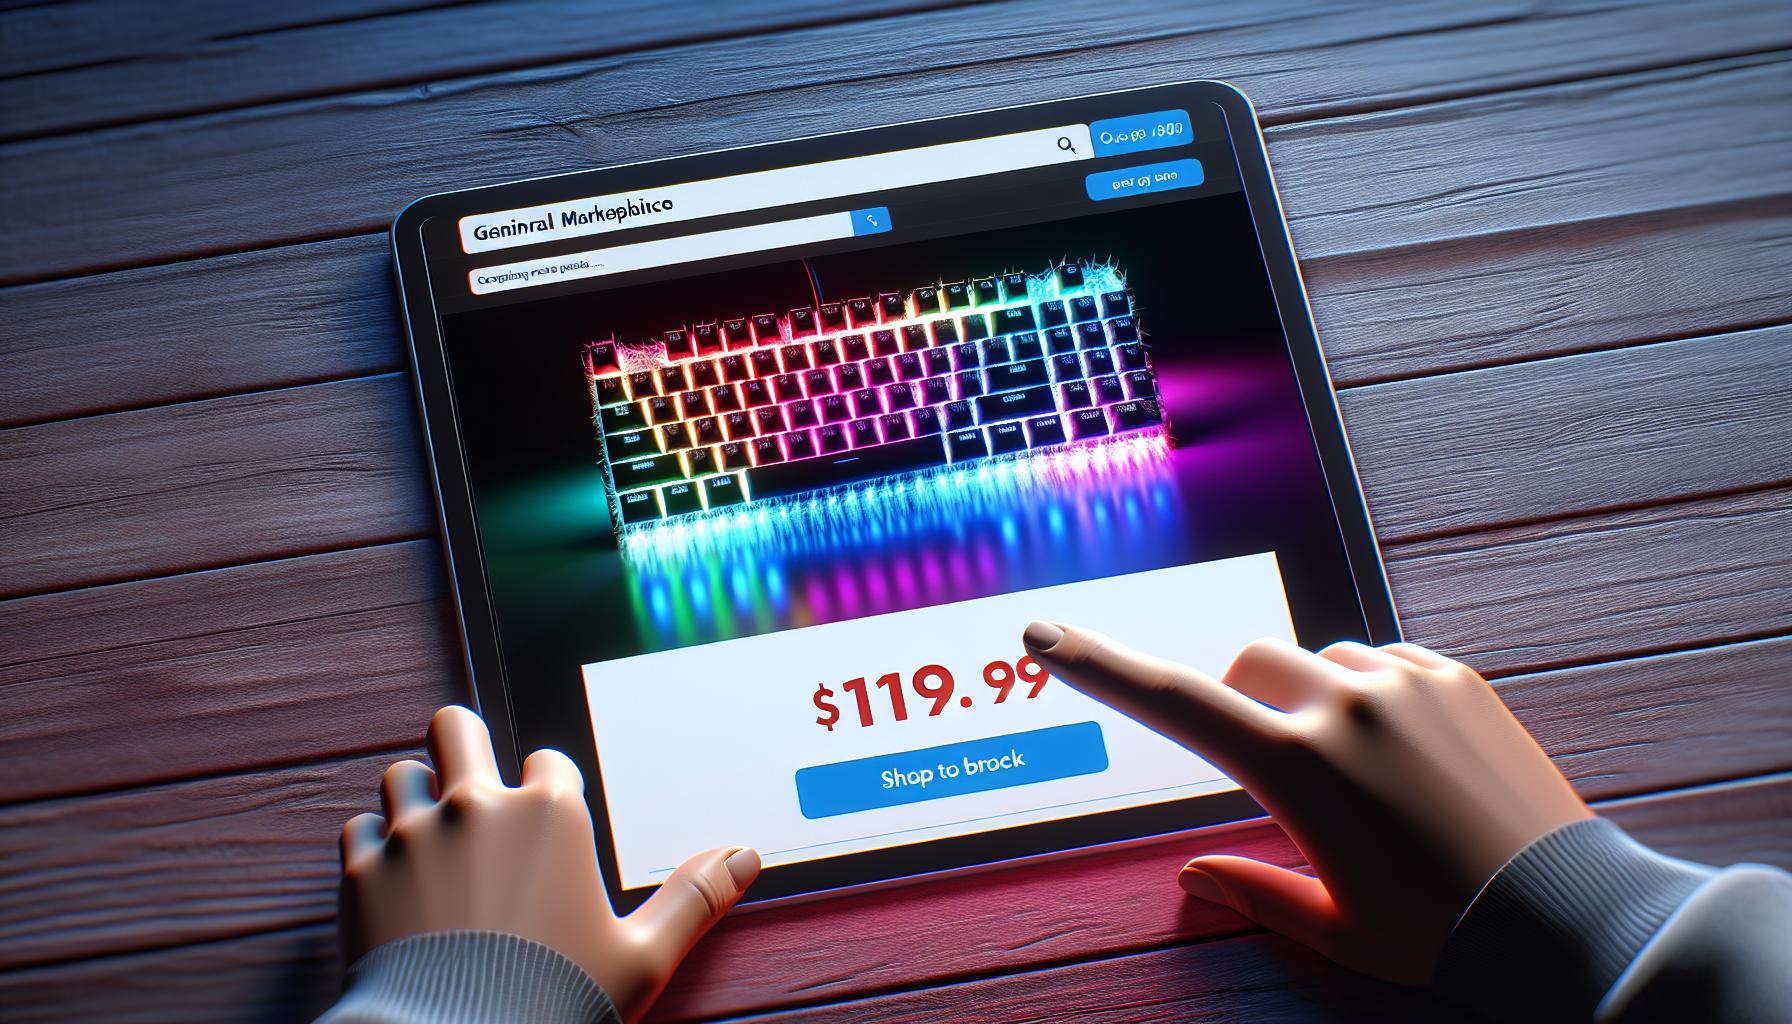 "Discount Alert: Asus Gaming Keyboard Hits Amazon's Lowest Price Ever" | FinOracle